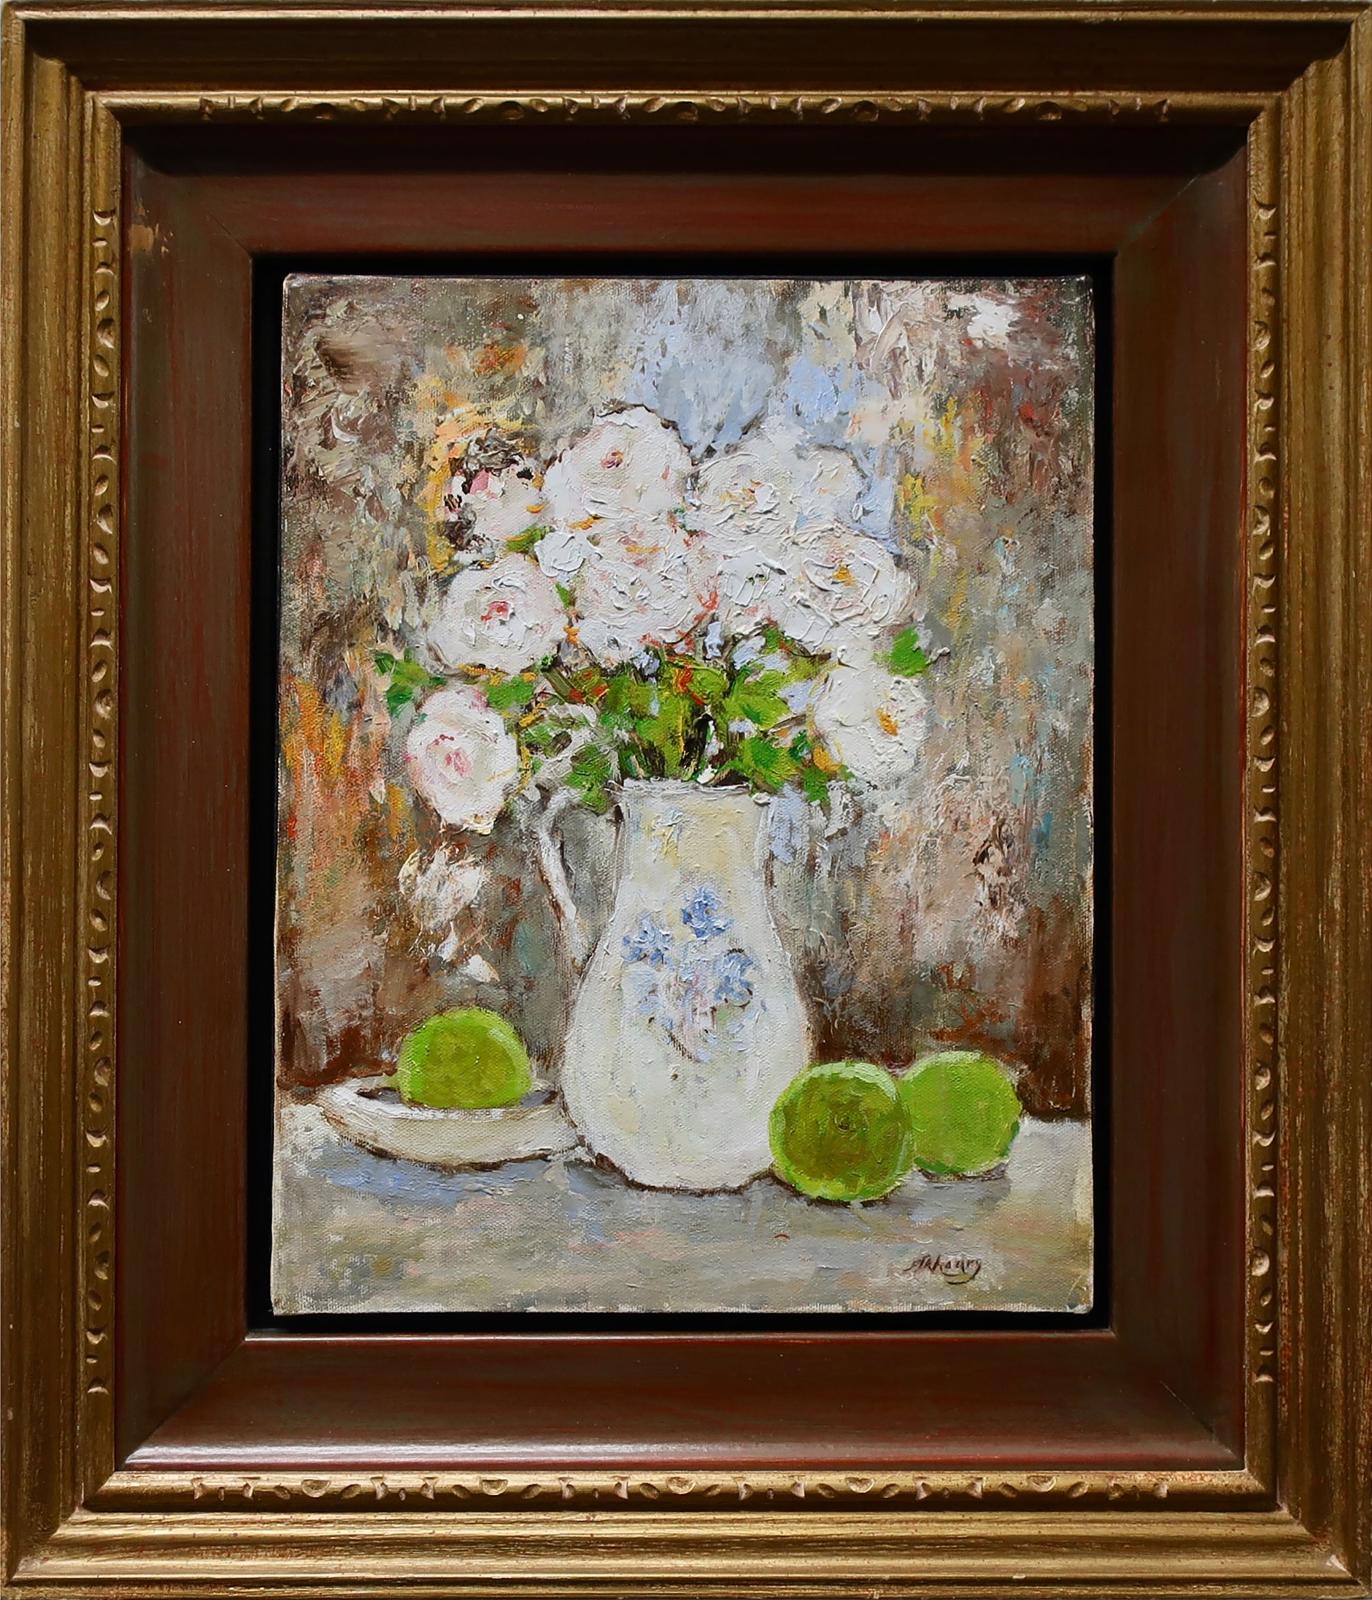 Michael Khoury (1950) - Peonies And Green Apples